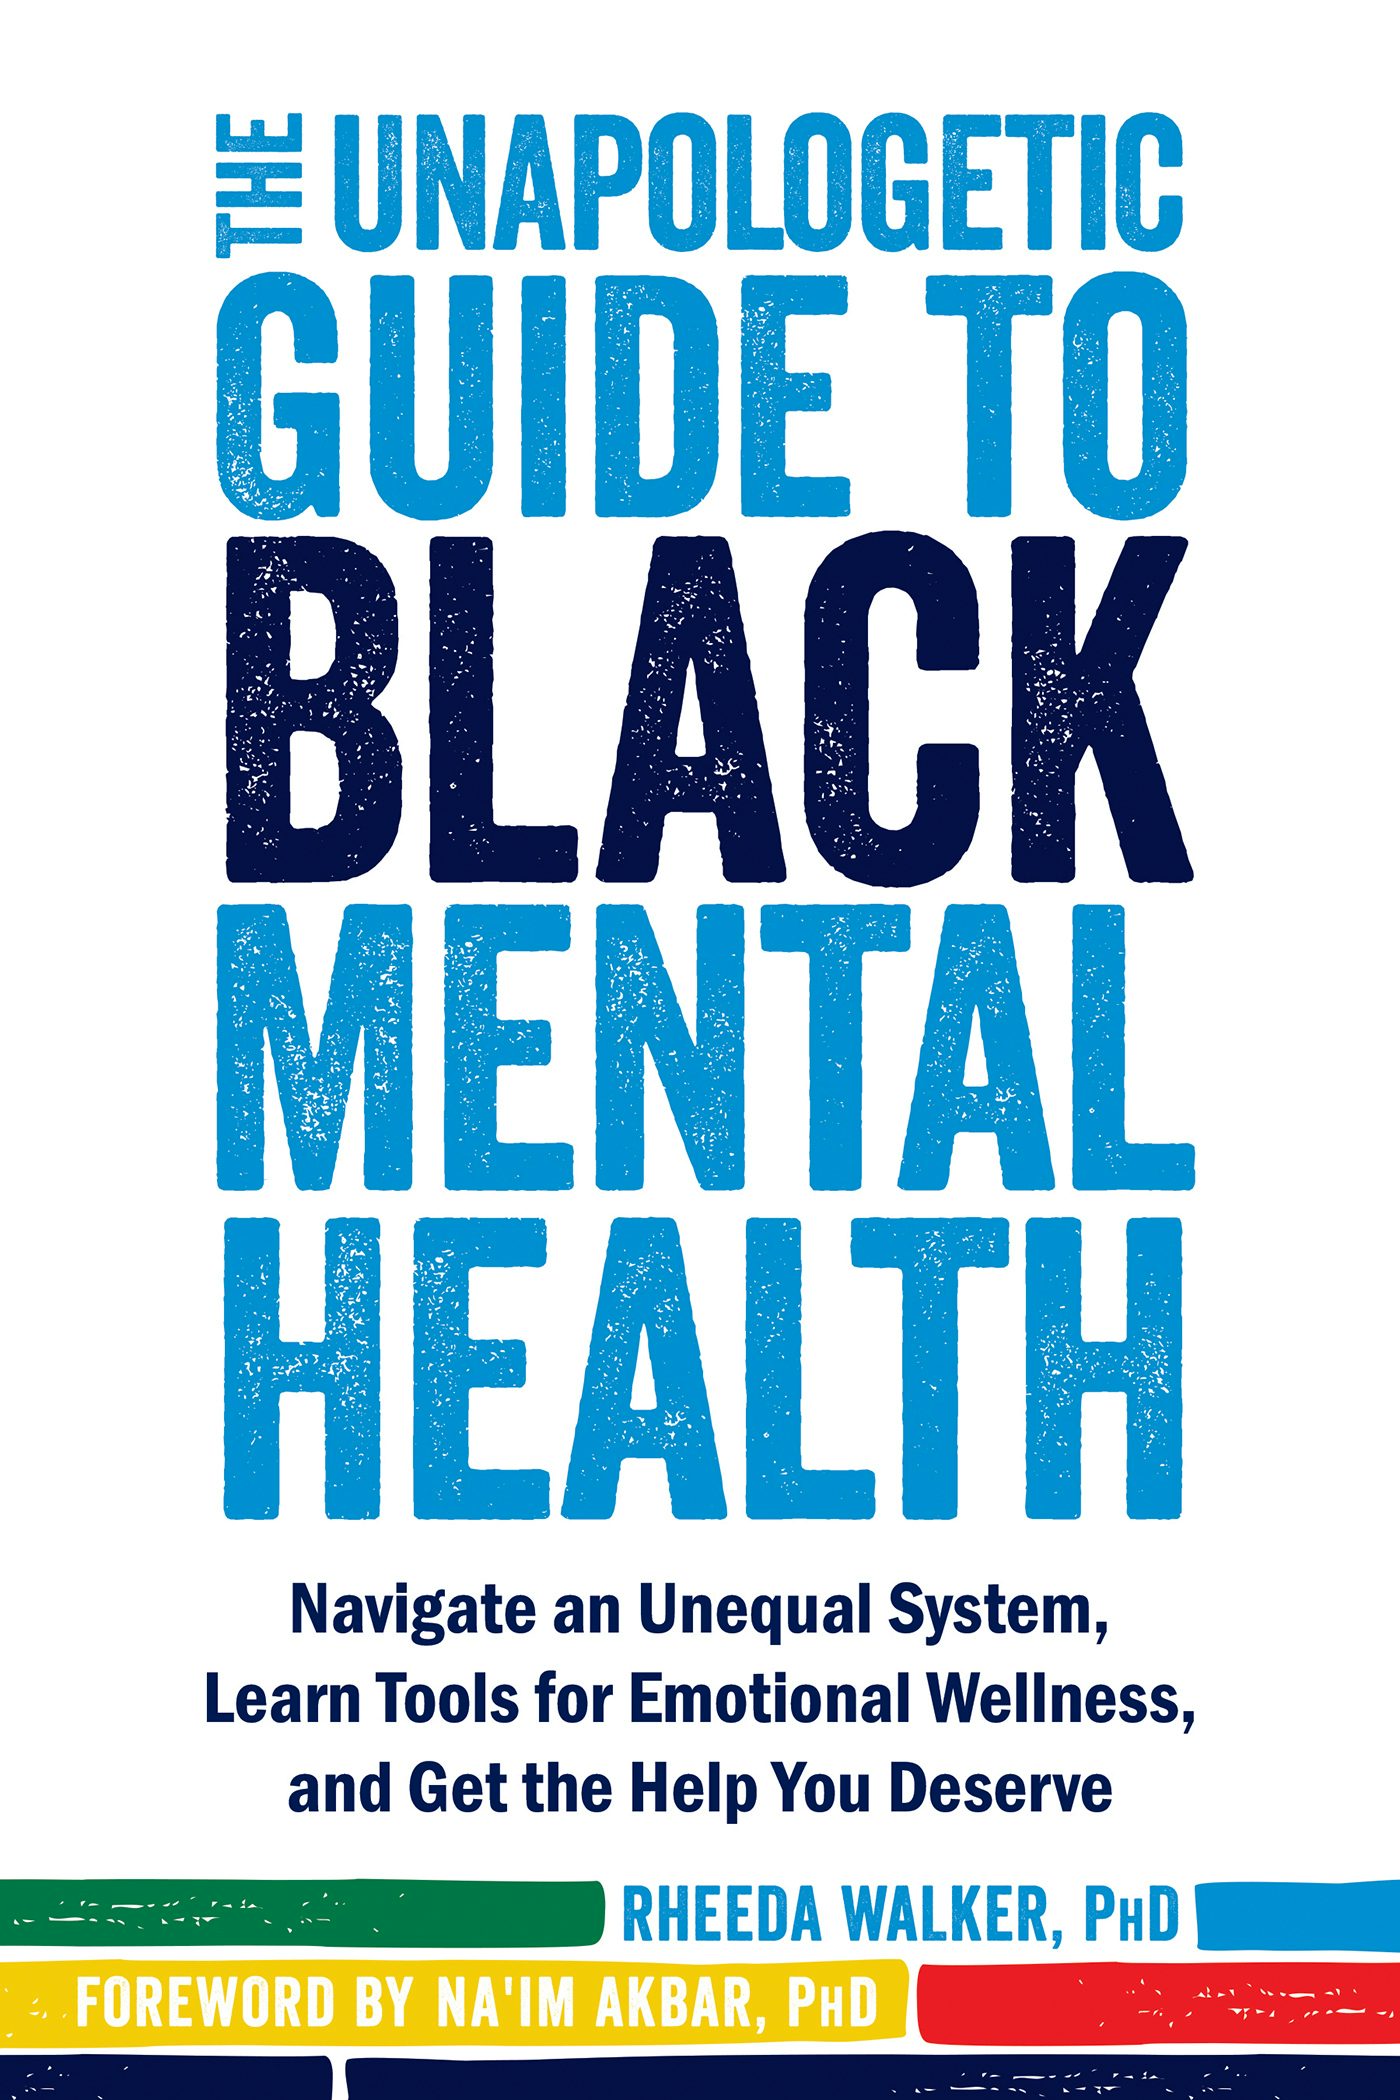 the unapologetic guide to mental health